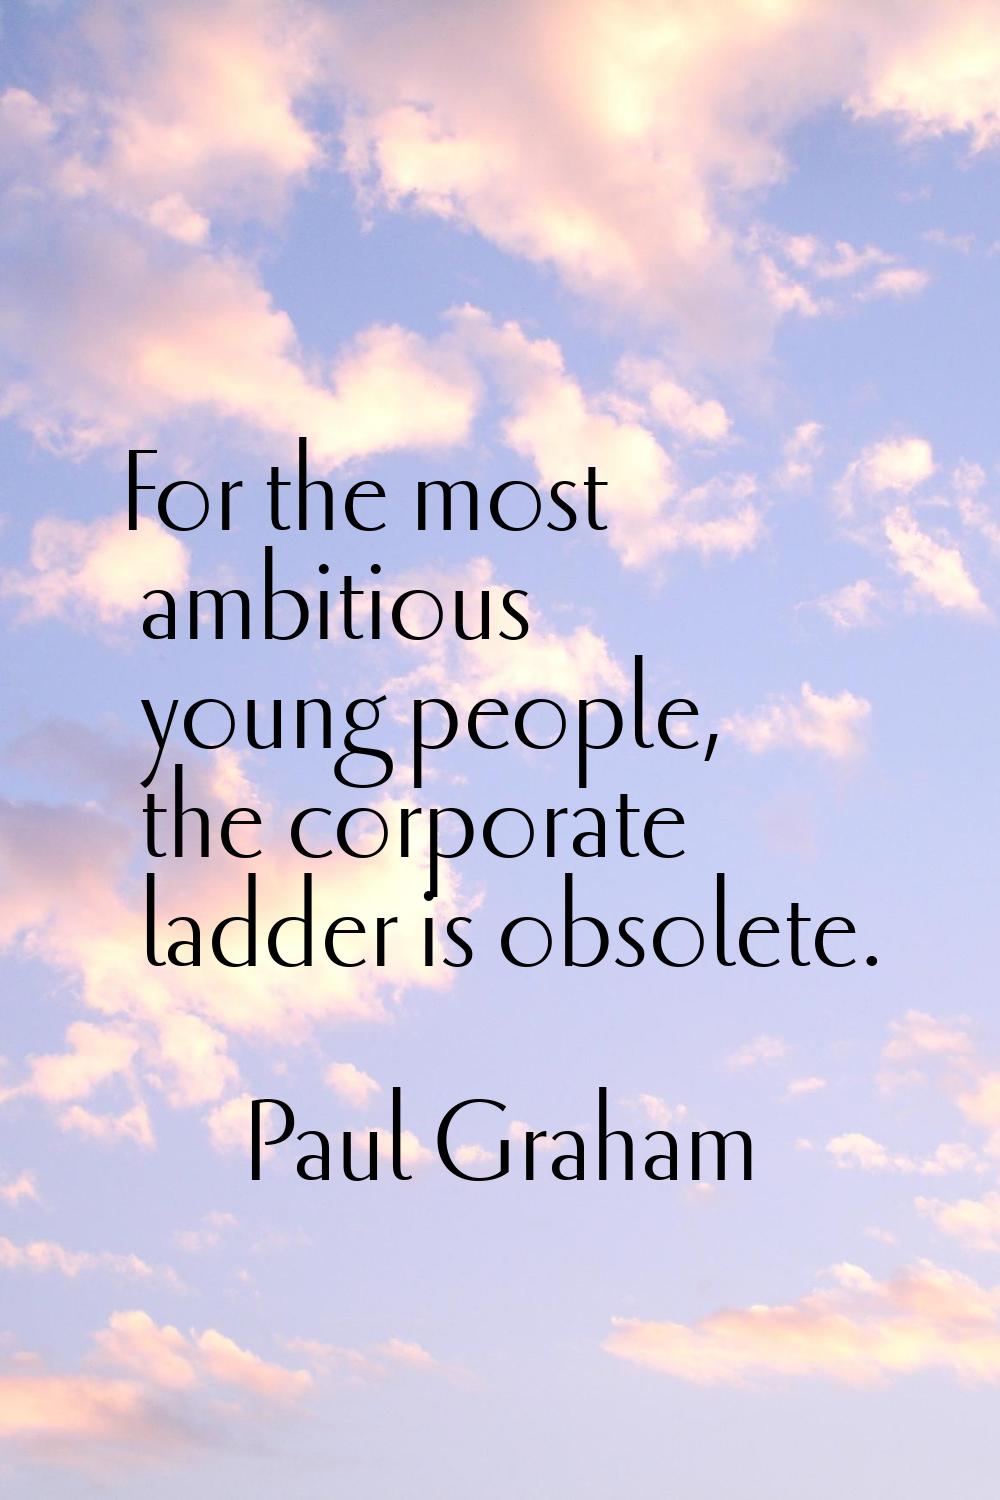 For the most ambitious young people, the corporate ladder is obsolete.